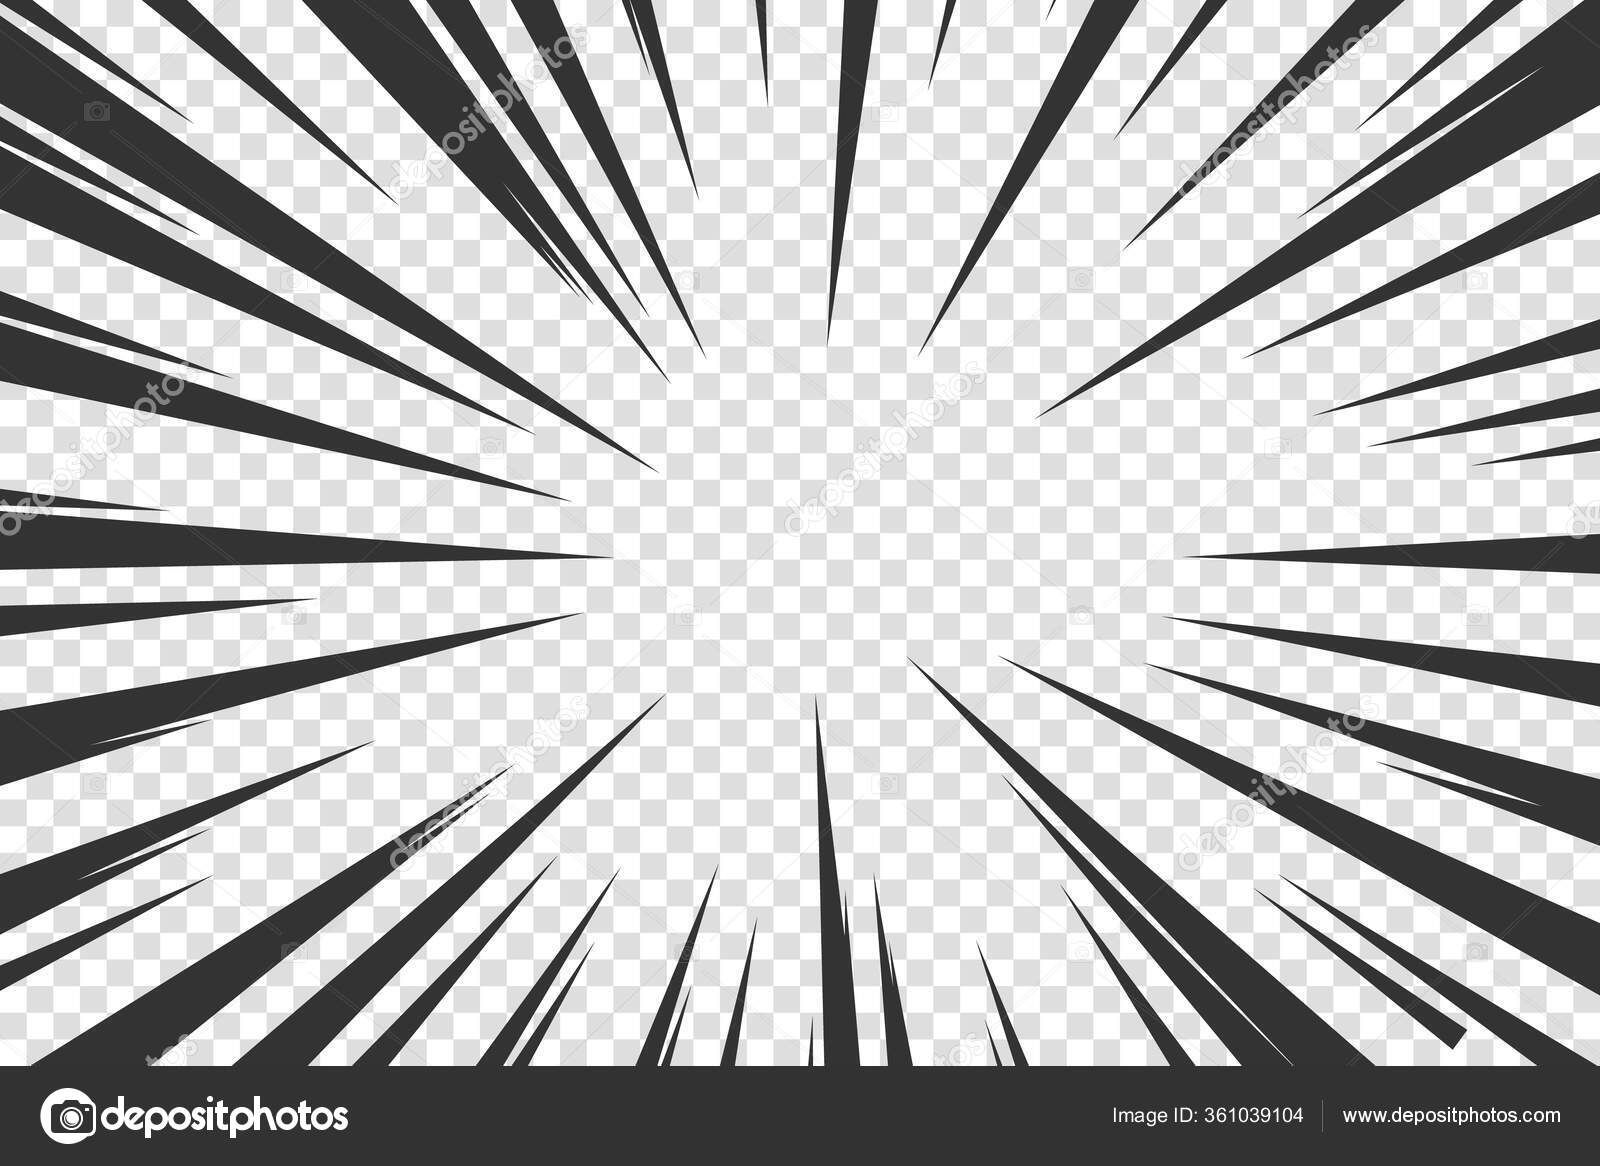 Set of comic style action effects speed lines Vector Image